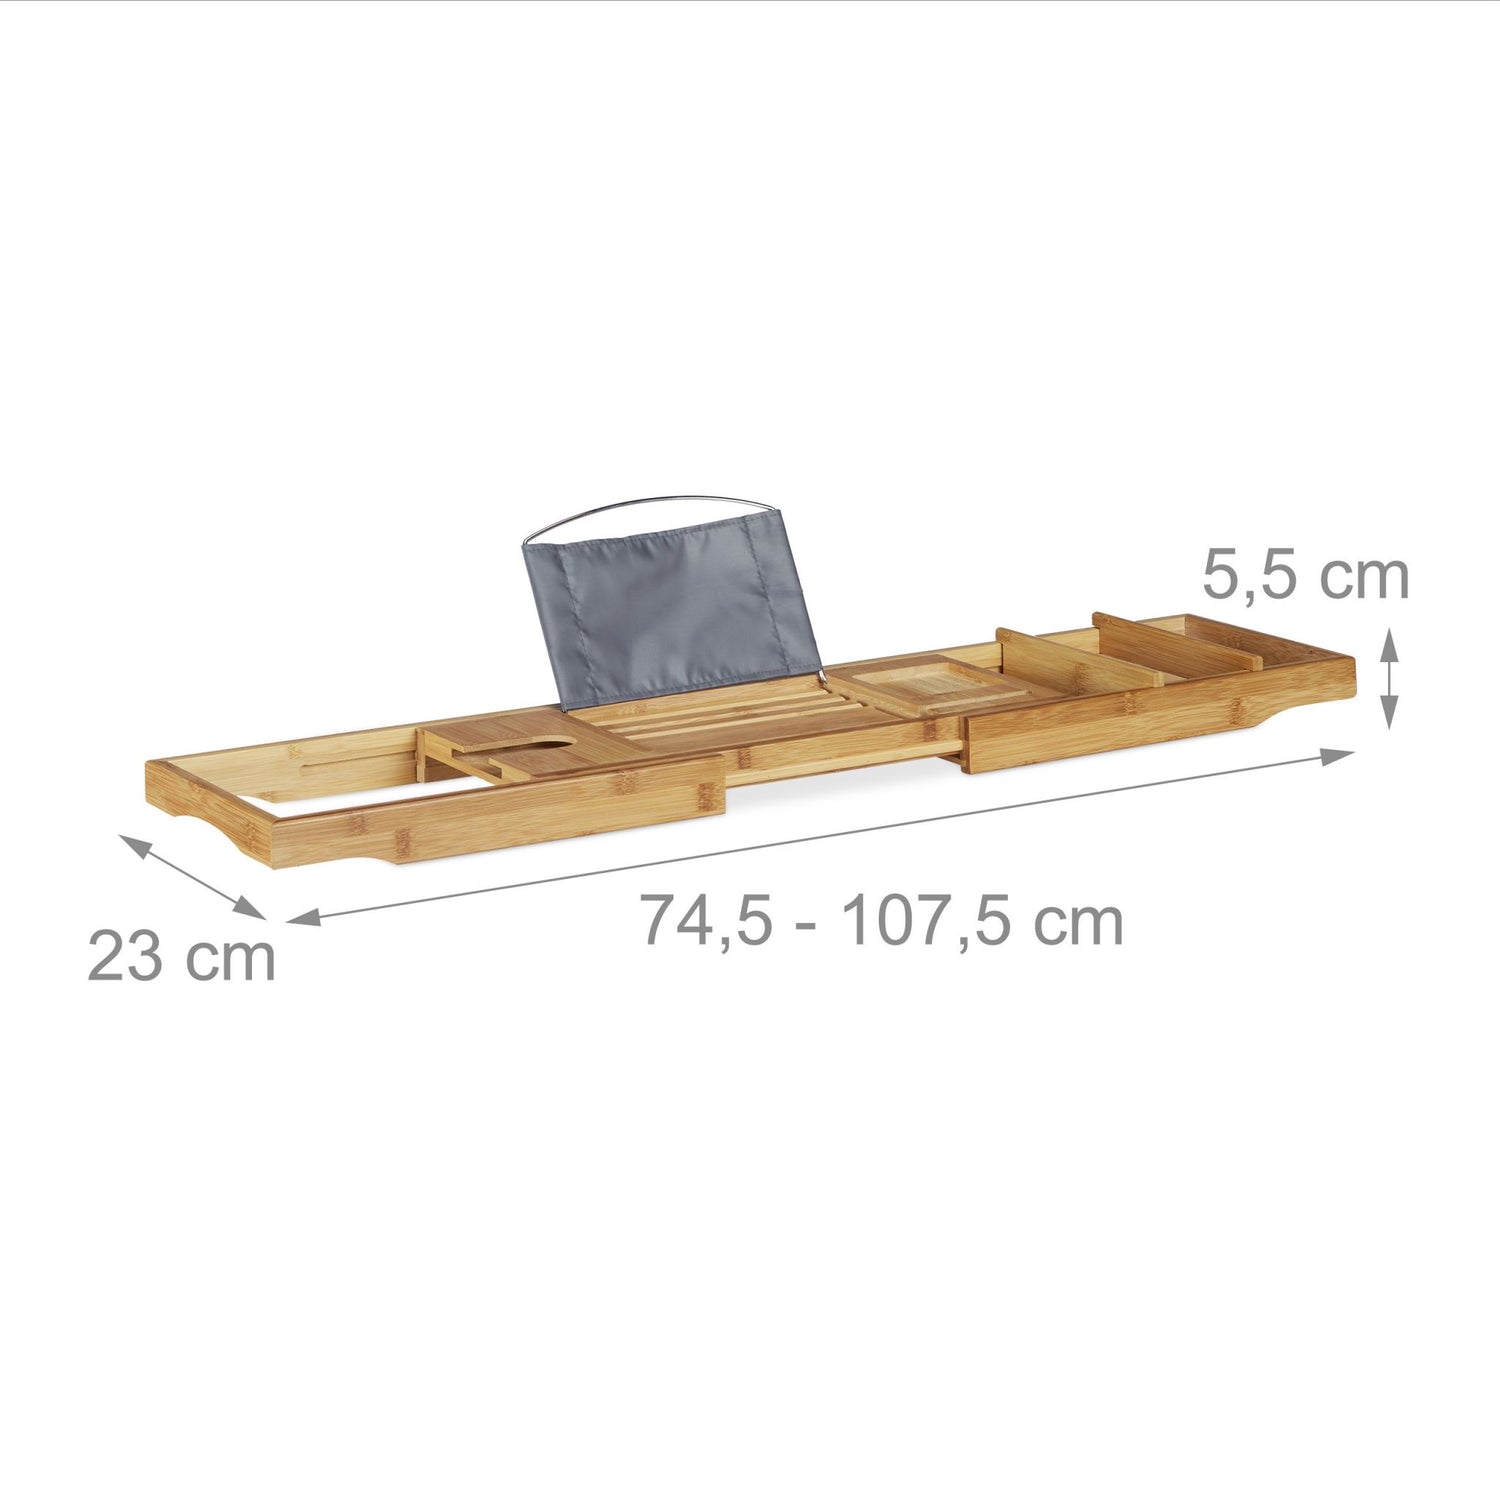 RelaxDays Bamboo Bathtub Caddy with Bookstand Bamboo Bathrooms